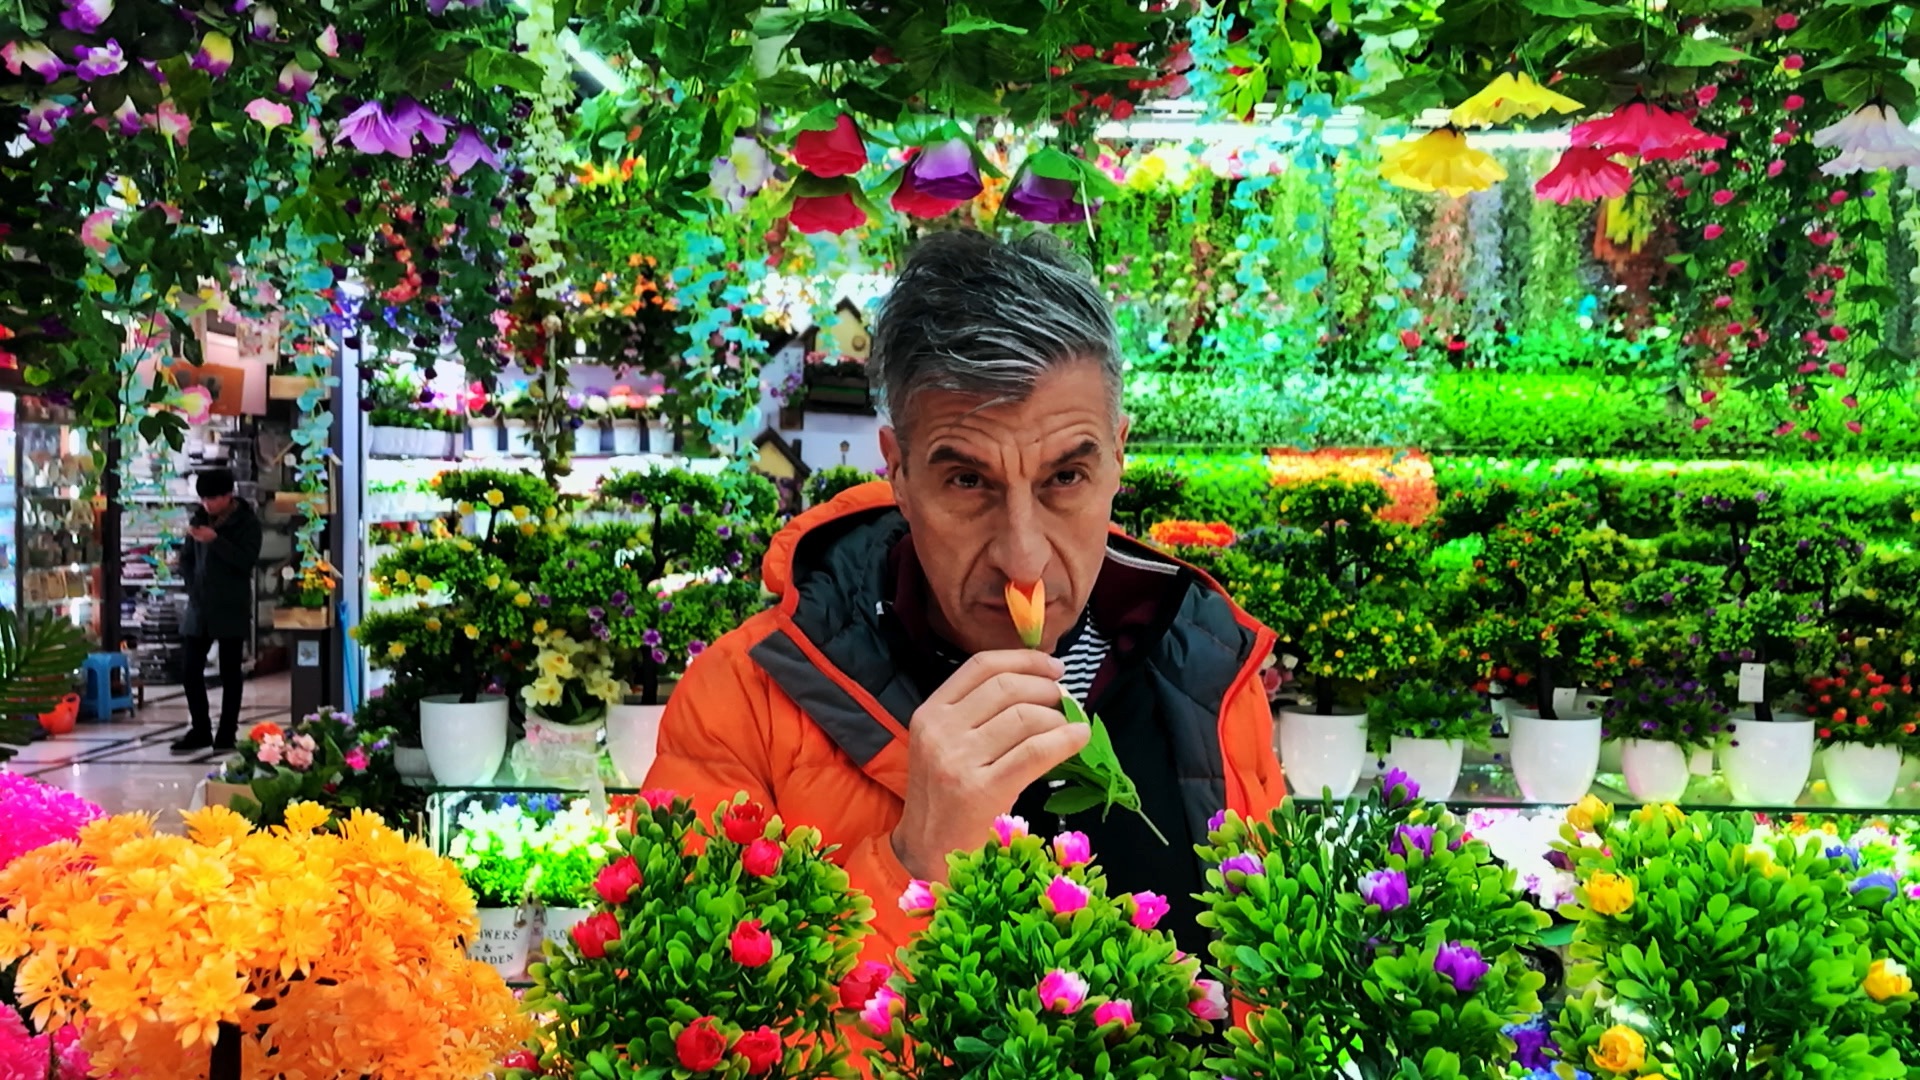 A still from Yuri Ancarani’s 2018 video, The Artist Is Present with Maurizio Cattelan and Gucci.